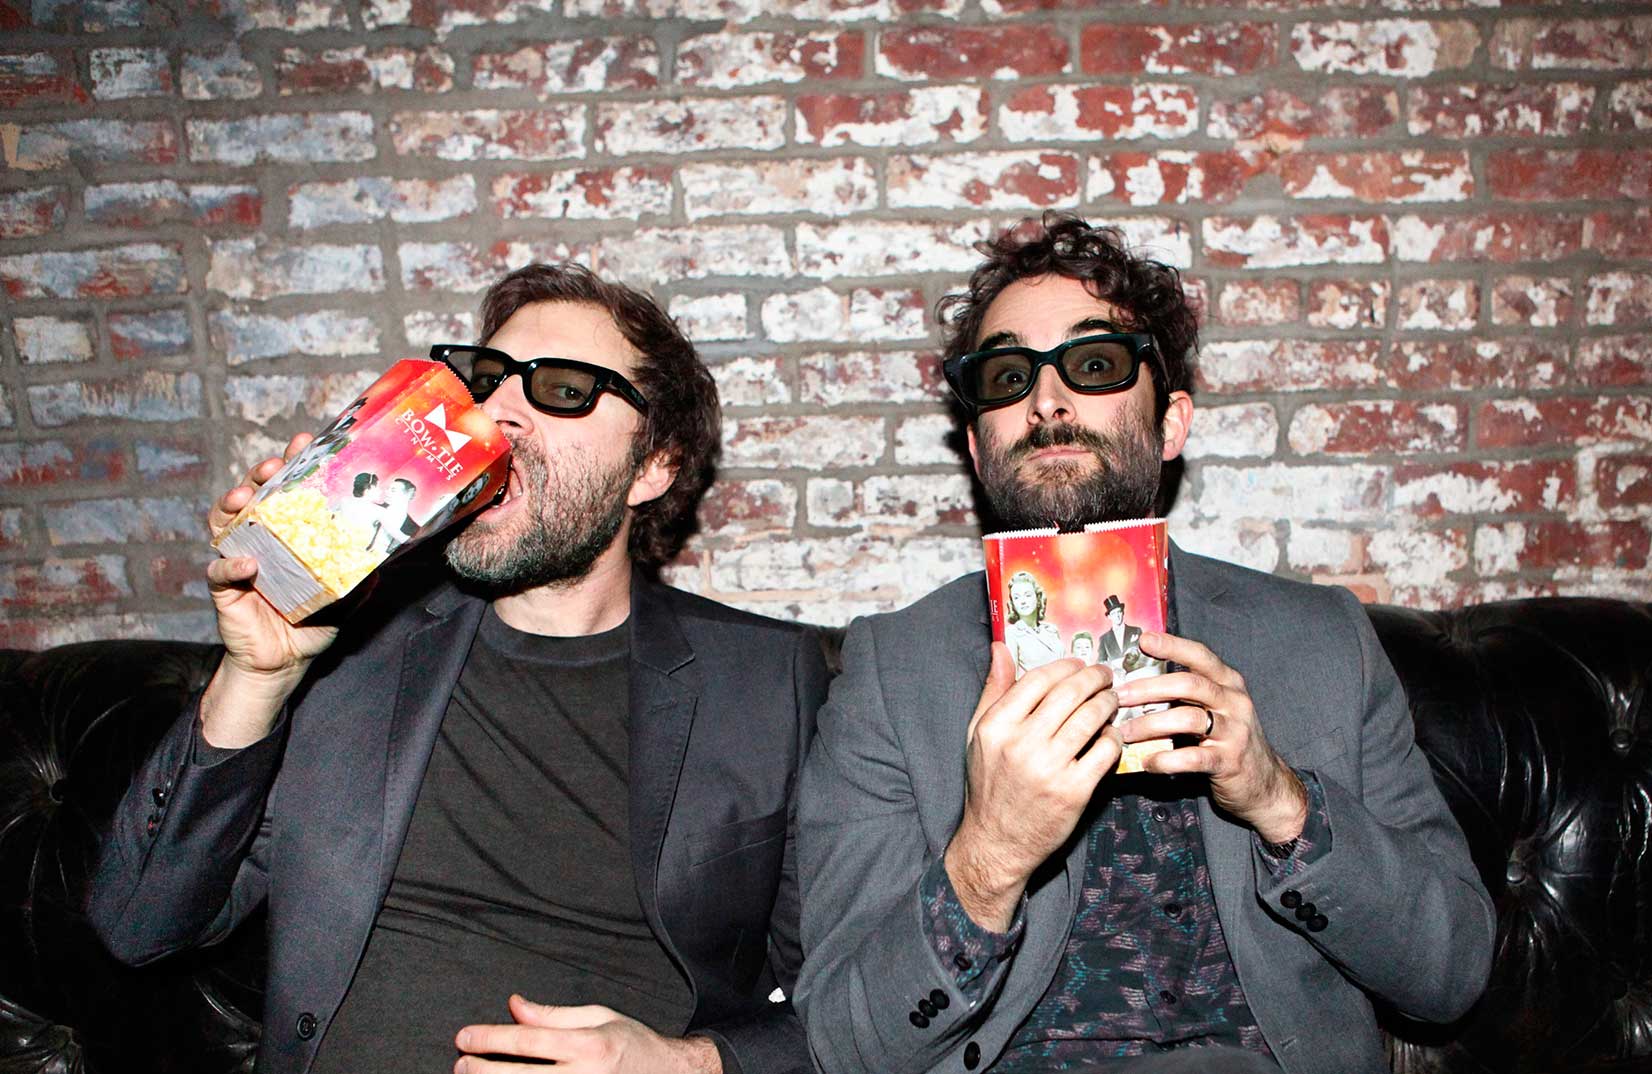 mark-duplass-jay-duplass-brothers-hollywood-indie-movies